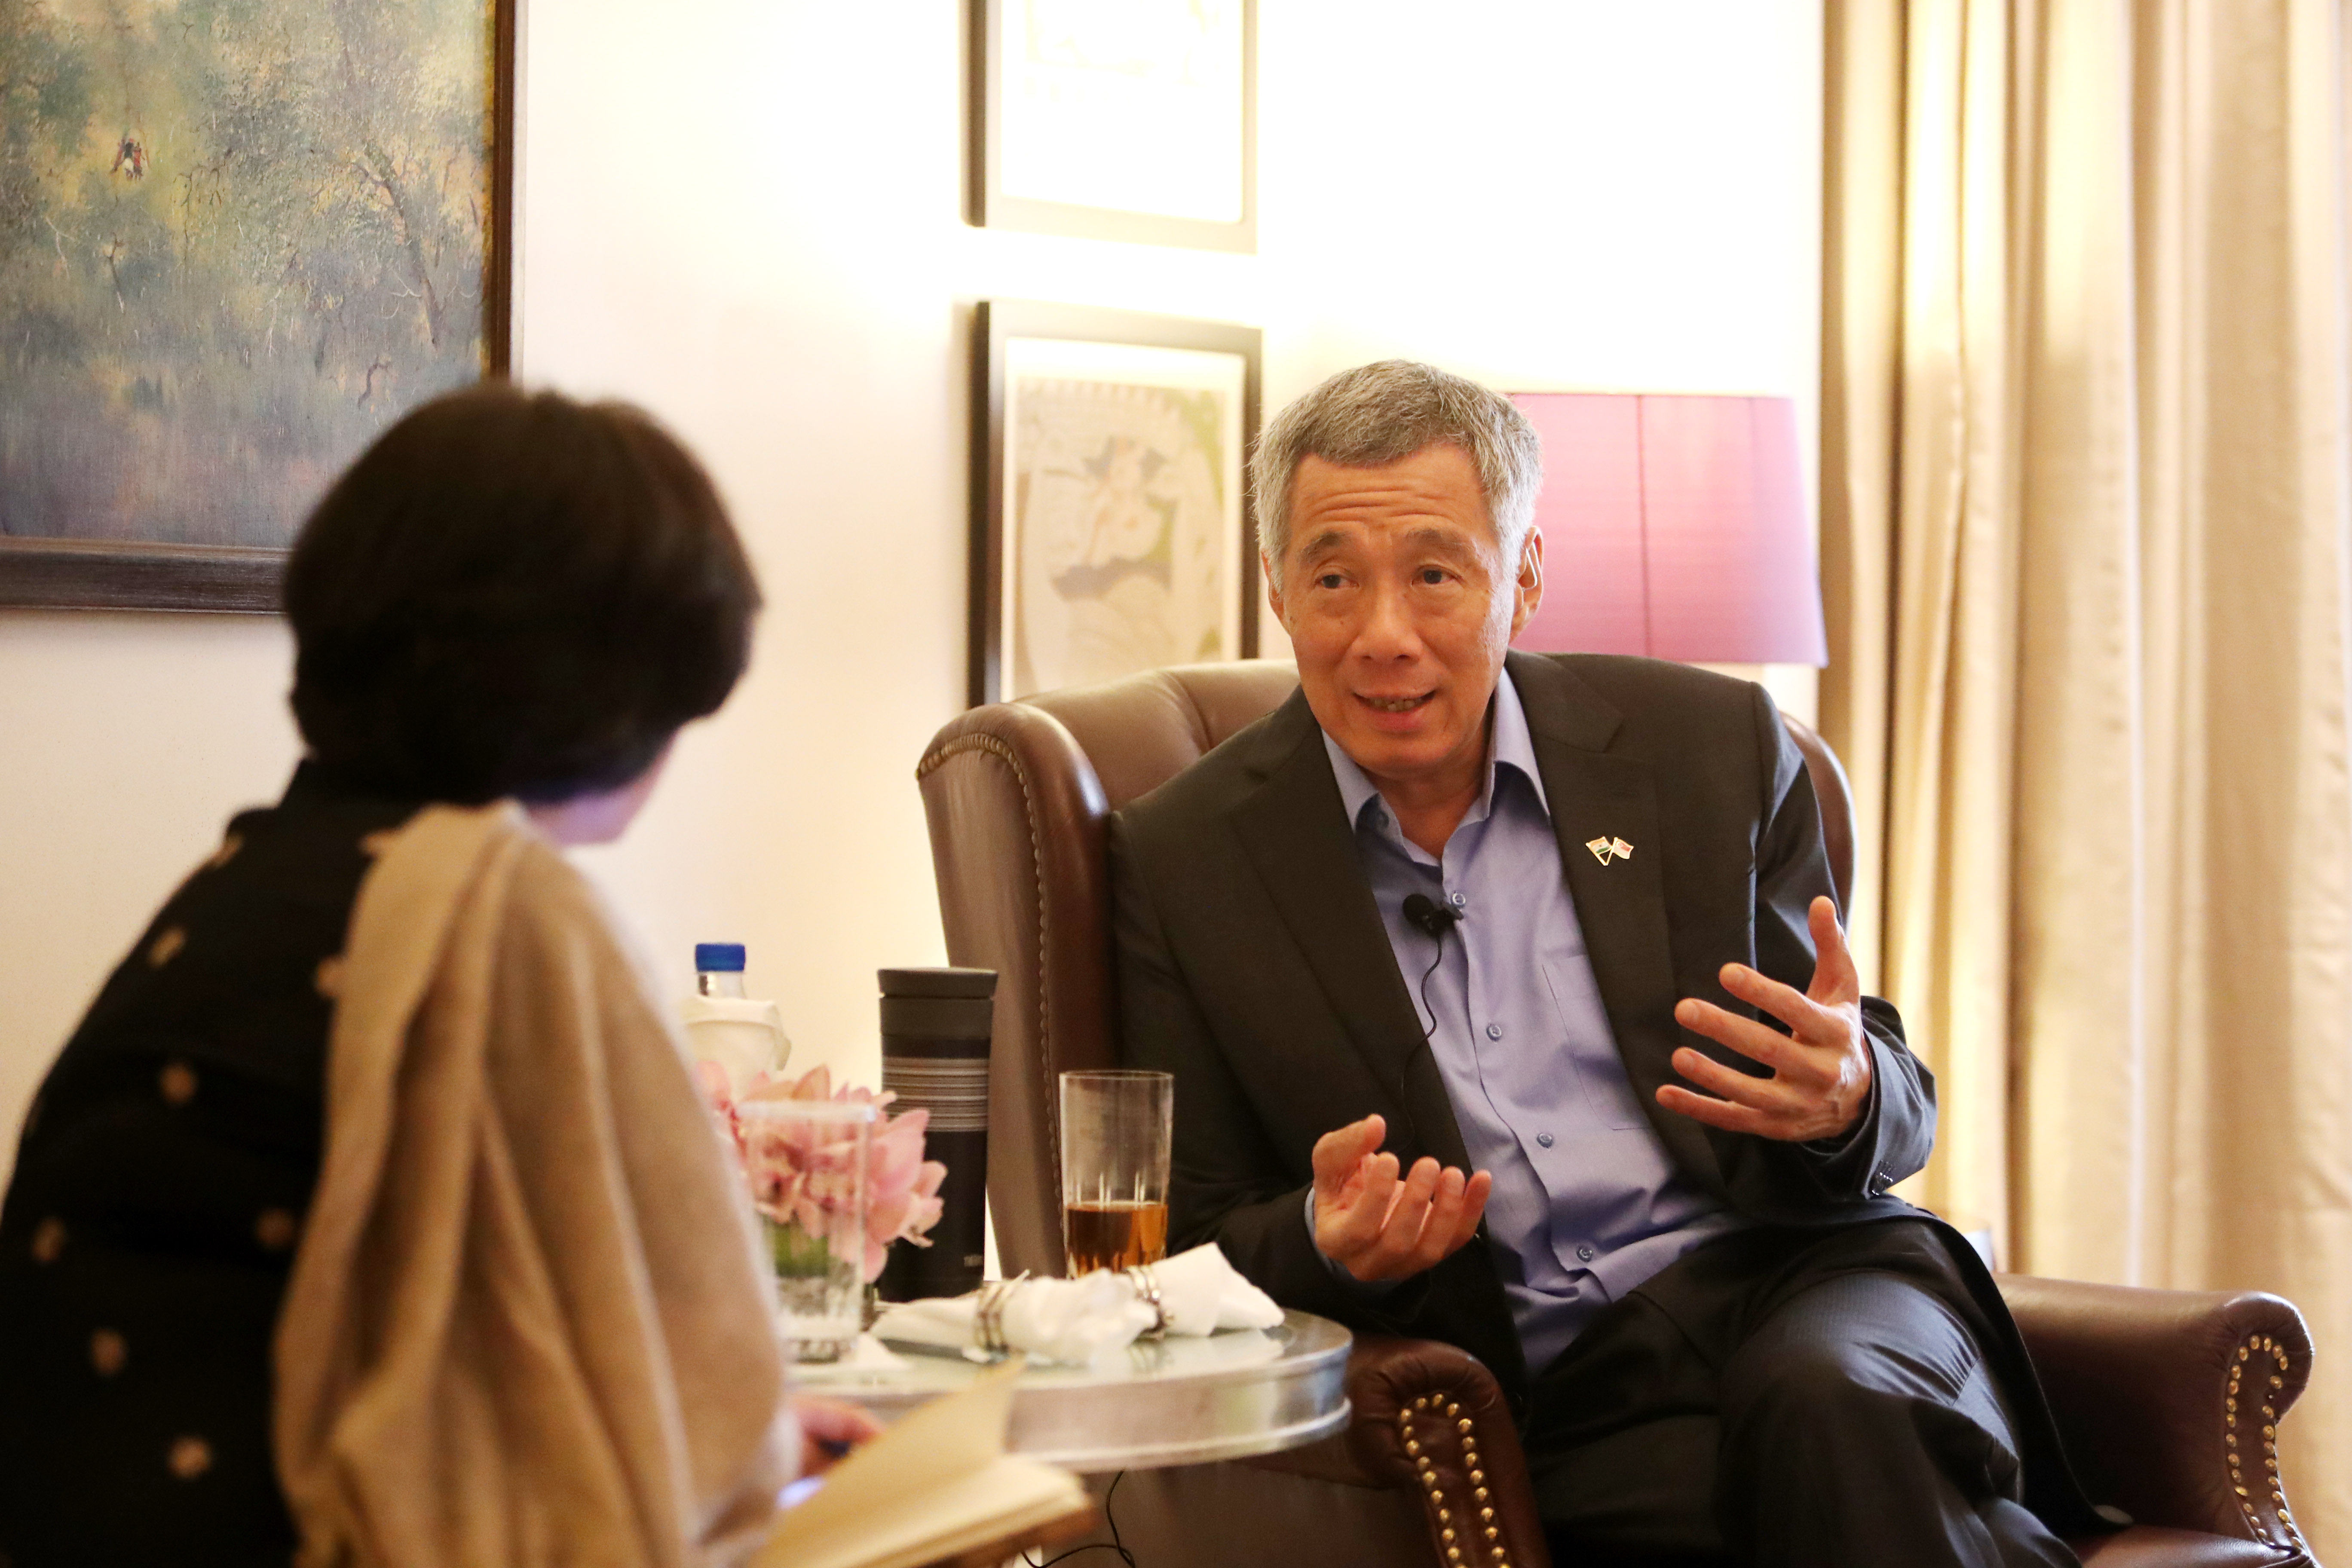 Transcript of PM Lee Hsien Loong's Interview with The Hindu